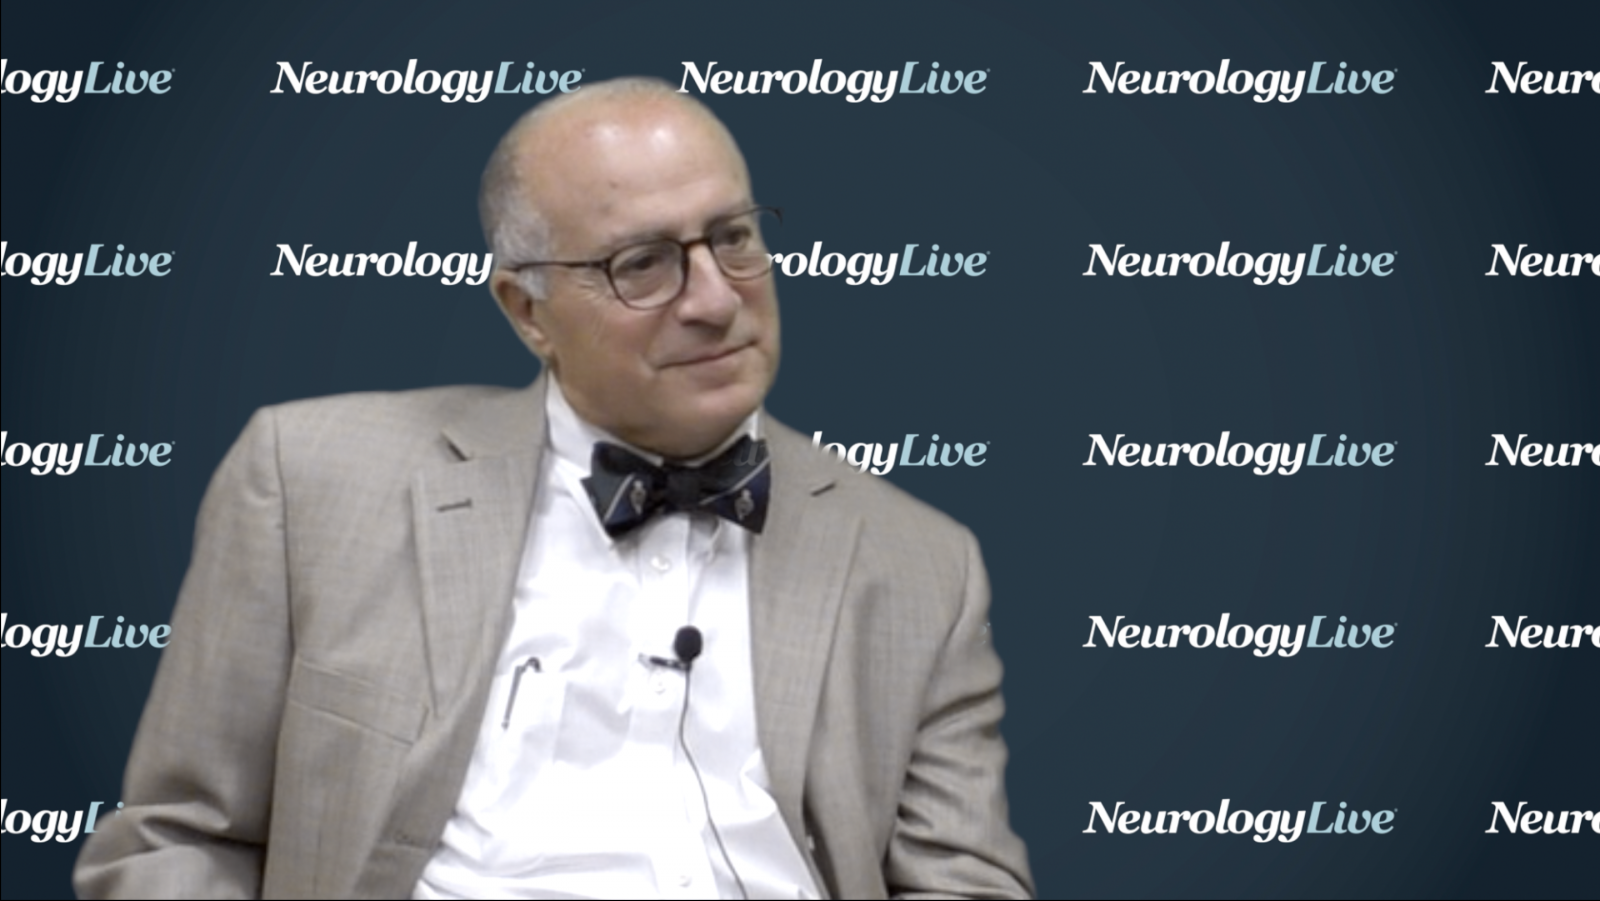 Joseph Berger, MD: The Role of Artificial Intelligence in Neurology